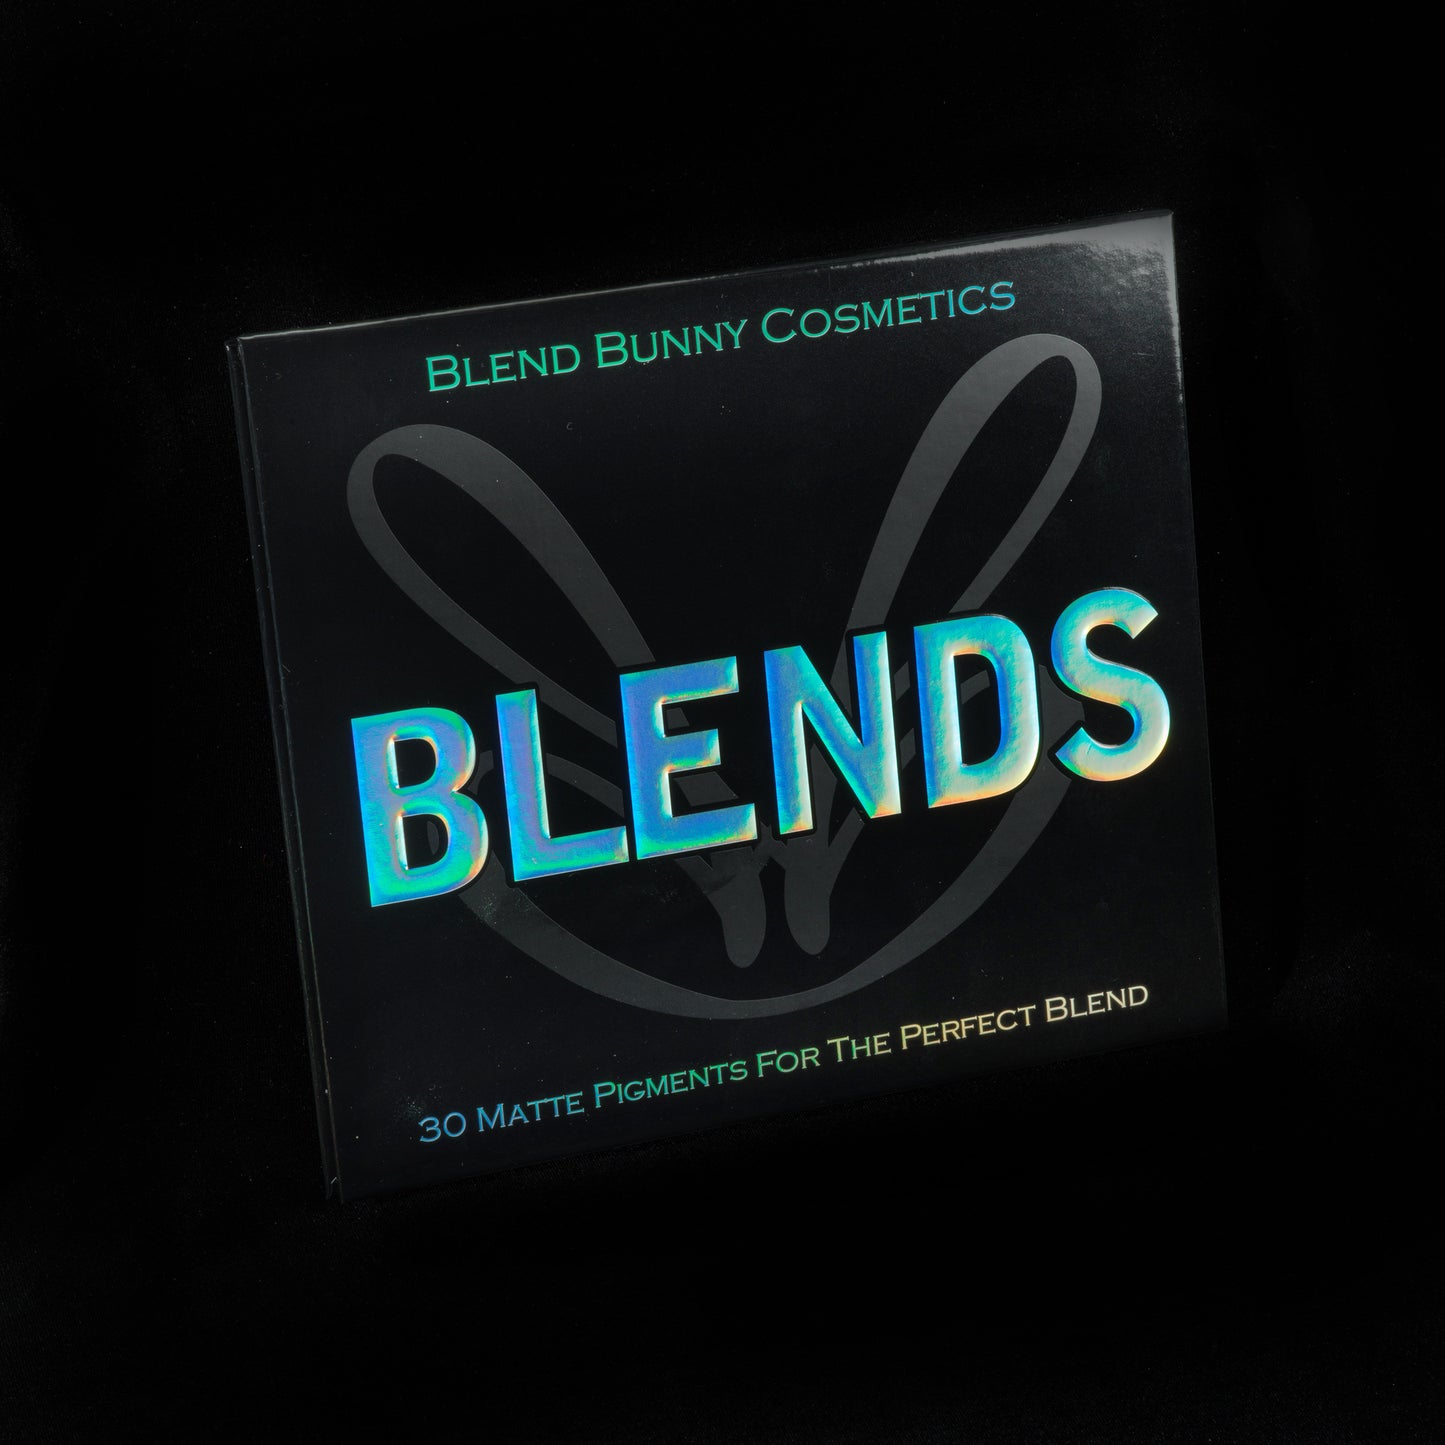 Blends palette closed by Blend Bunny Cosmetics